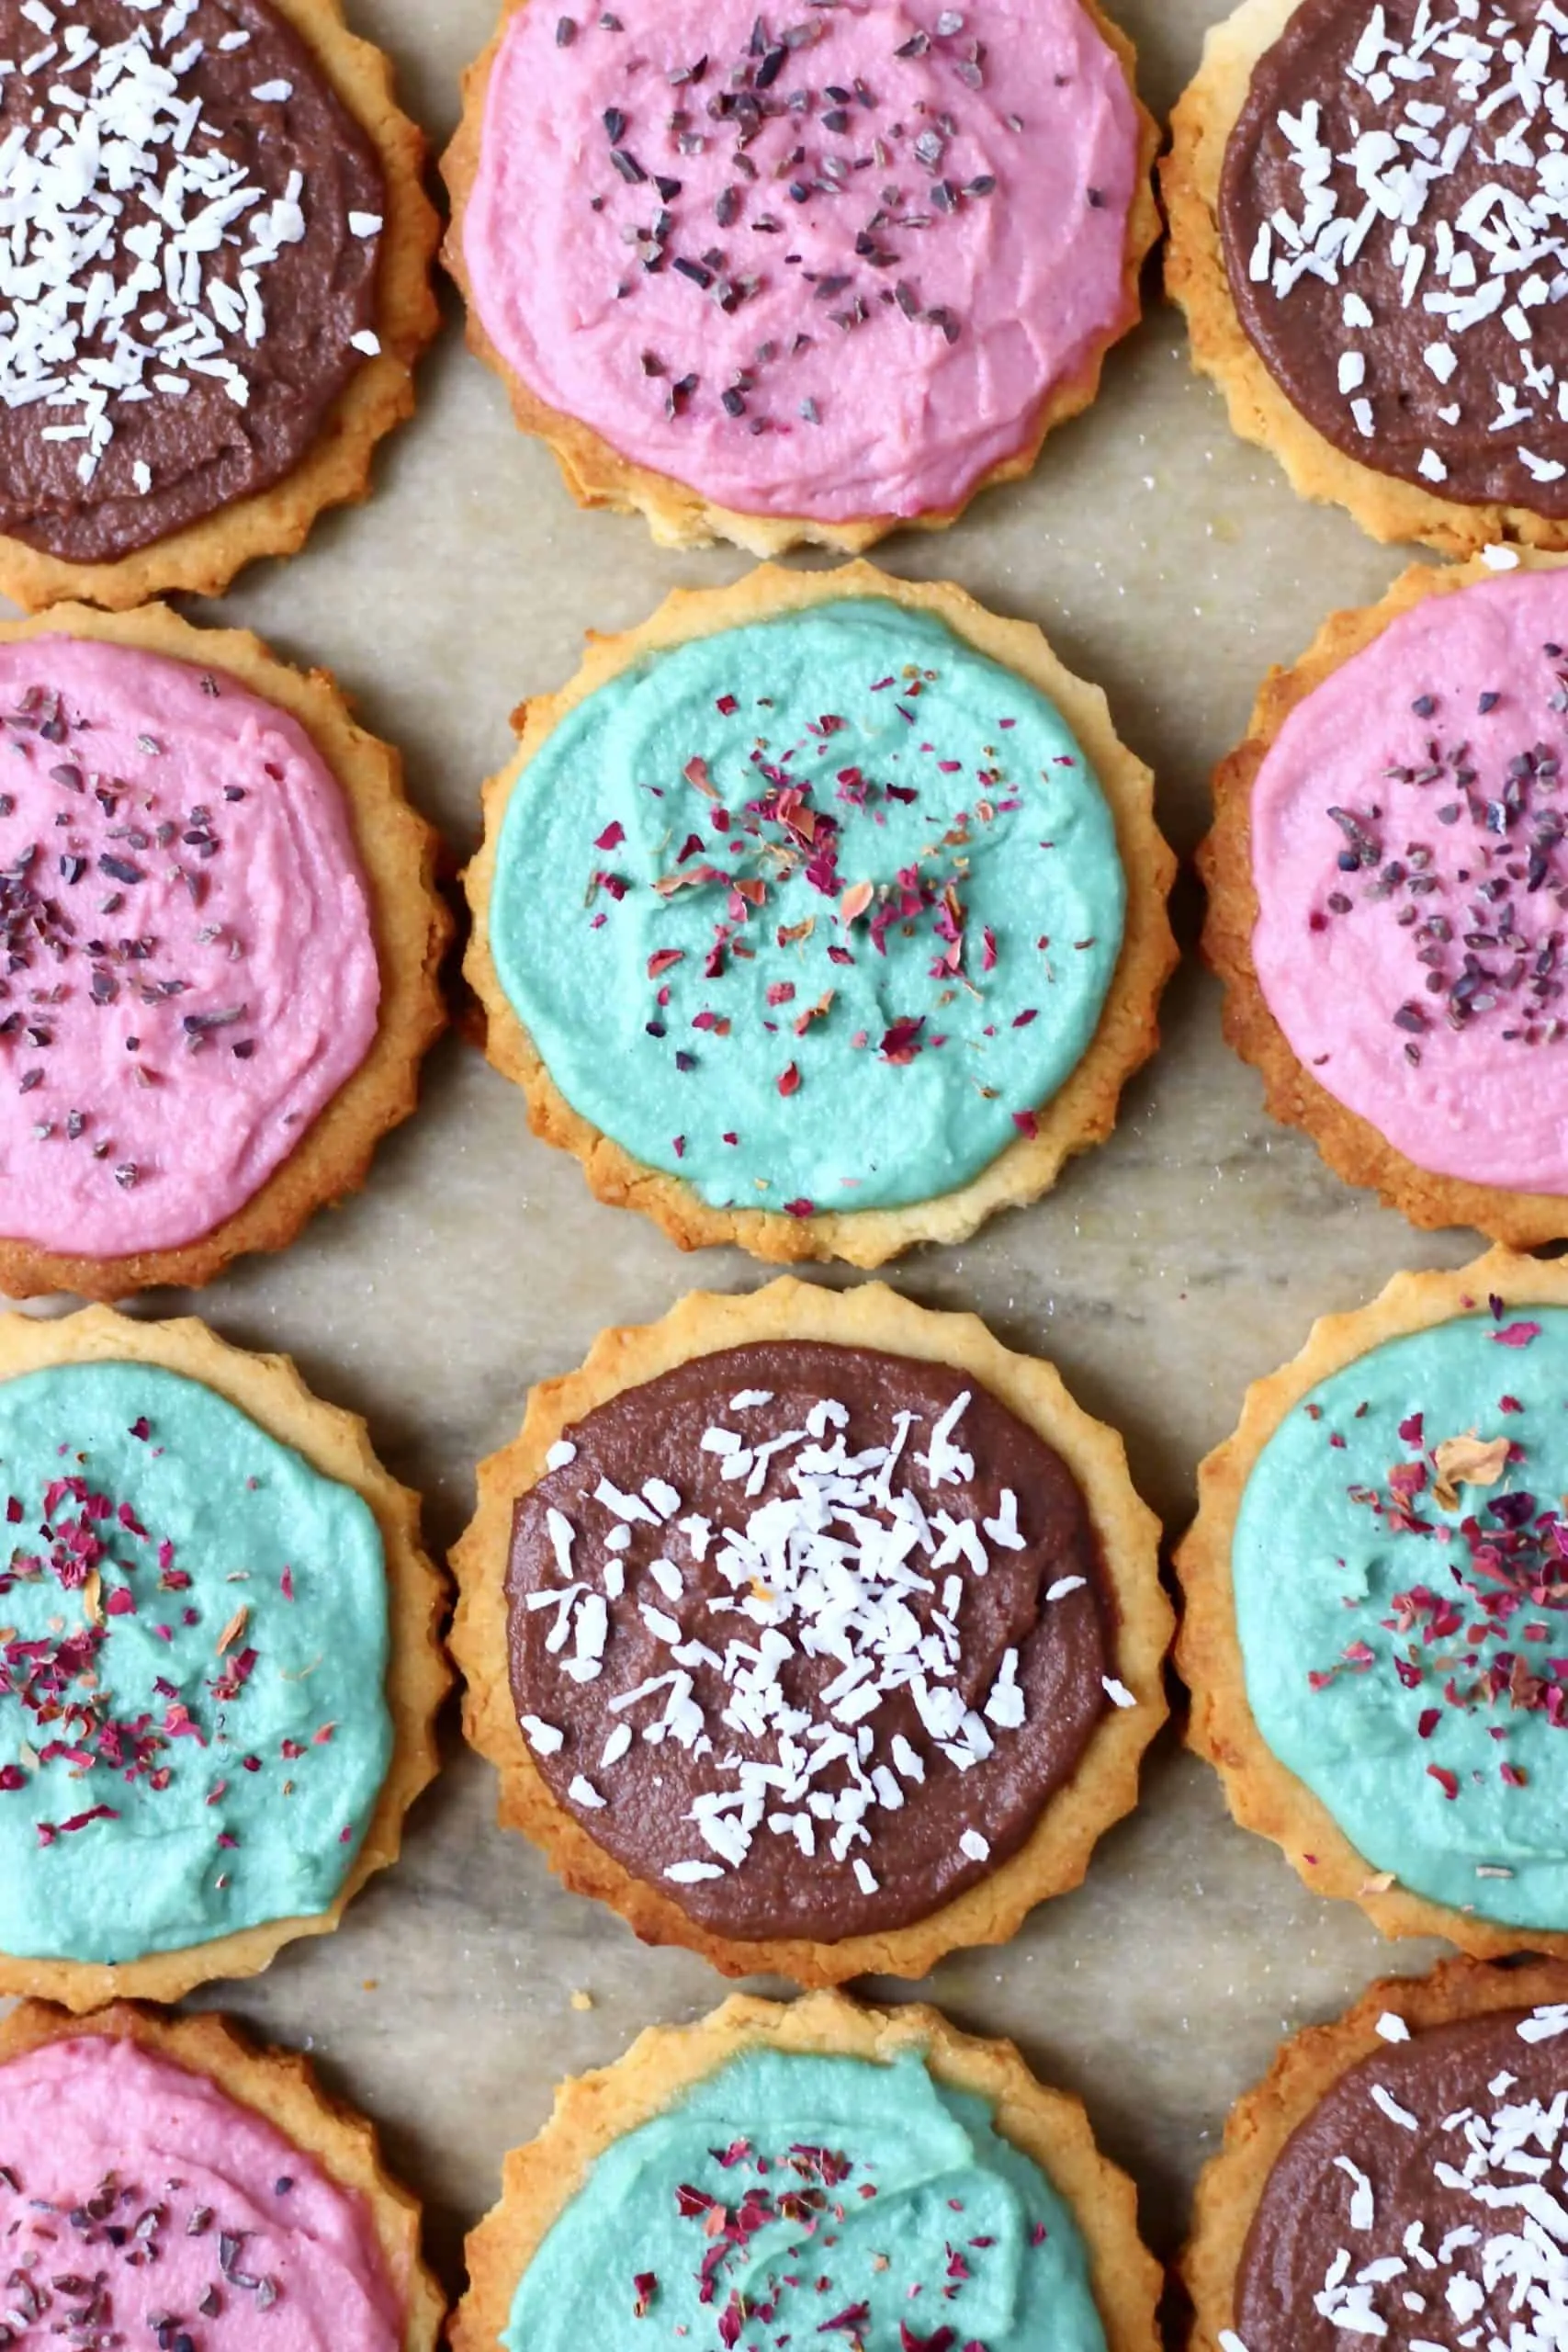 Twelve circular sugar cookies topped with different coloured frosting and sprinkles on a sheet of brown baking paper